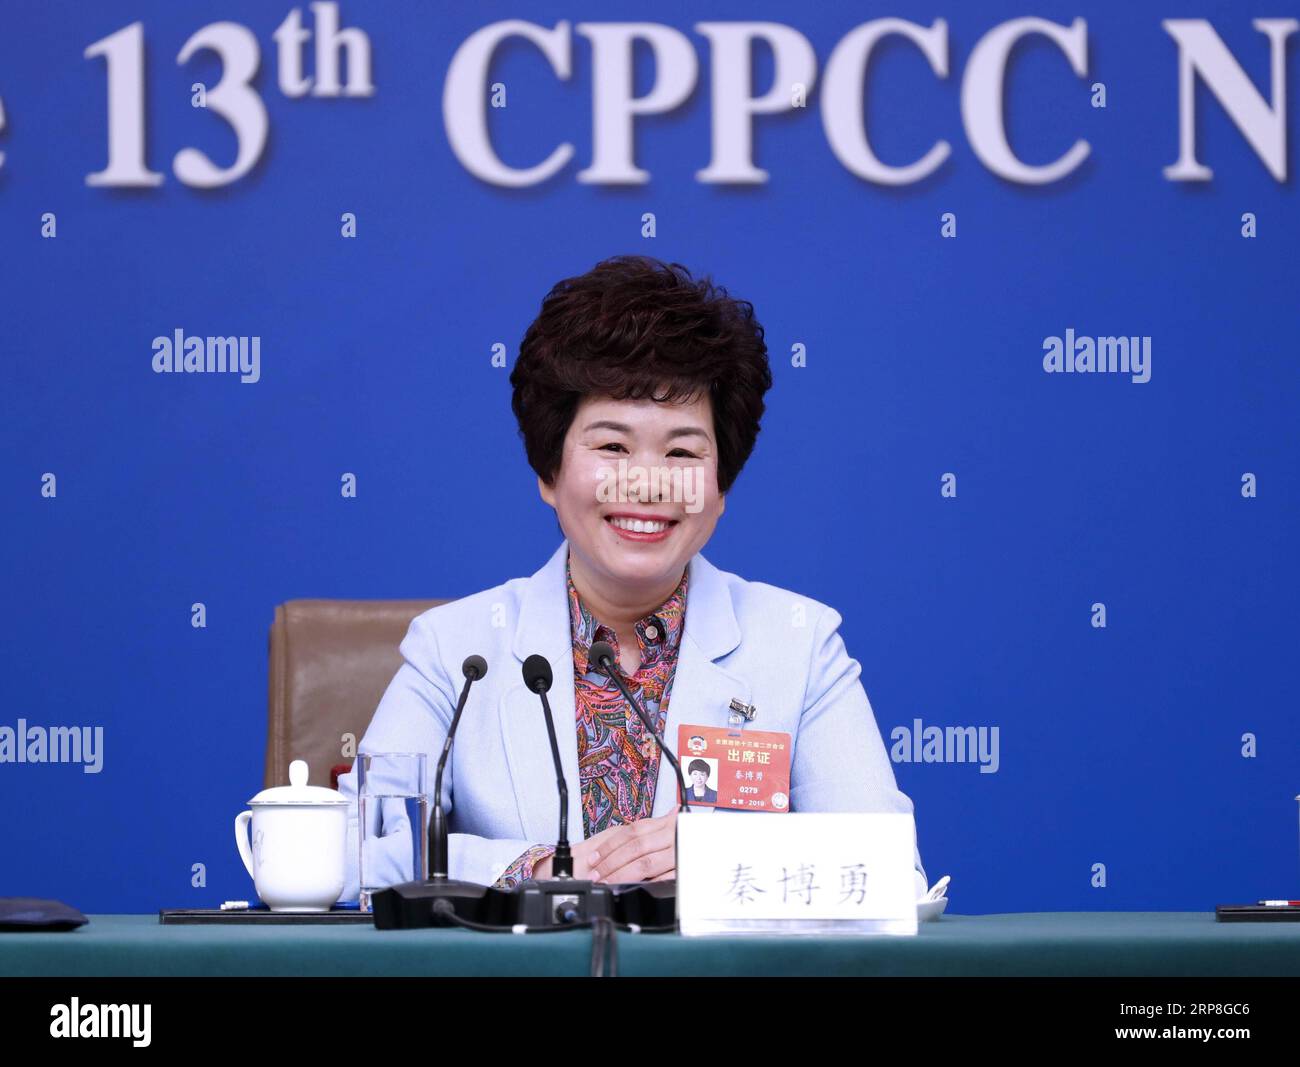 (190305) -- BEIJING, March 5, 2019 -- Qin Boyong, a member of the 13th National Committee of the Chinese People s Political Consultative Conference (CPPCC), attends a press conference on winning the three major battles of forestalling and defusing major risks, carrying out targeted poverty alleviation, and preventing and controlling pollution, for the second session of the 13th CPPCC National Committee in Beijing, capital of China, March 5, 2019. ) (TWO SESSIONS)CHINA-BEIJING-CPPCC-PRESS CONFERENCE (CN) ShenxBohan PUBLICATIONxNOTxINxCHN Stock Photo